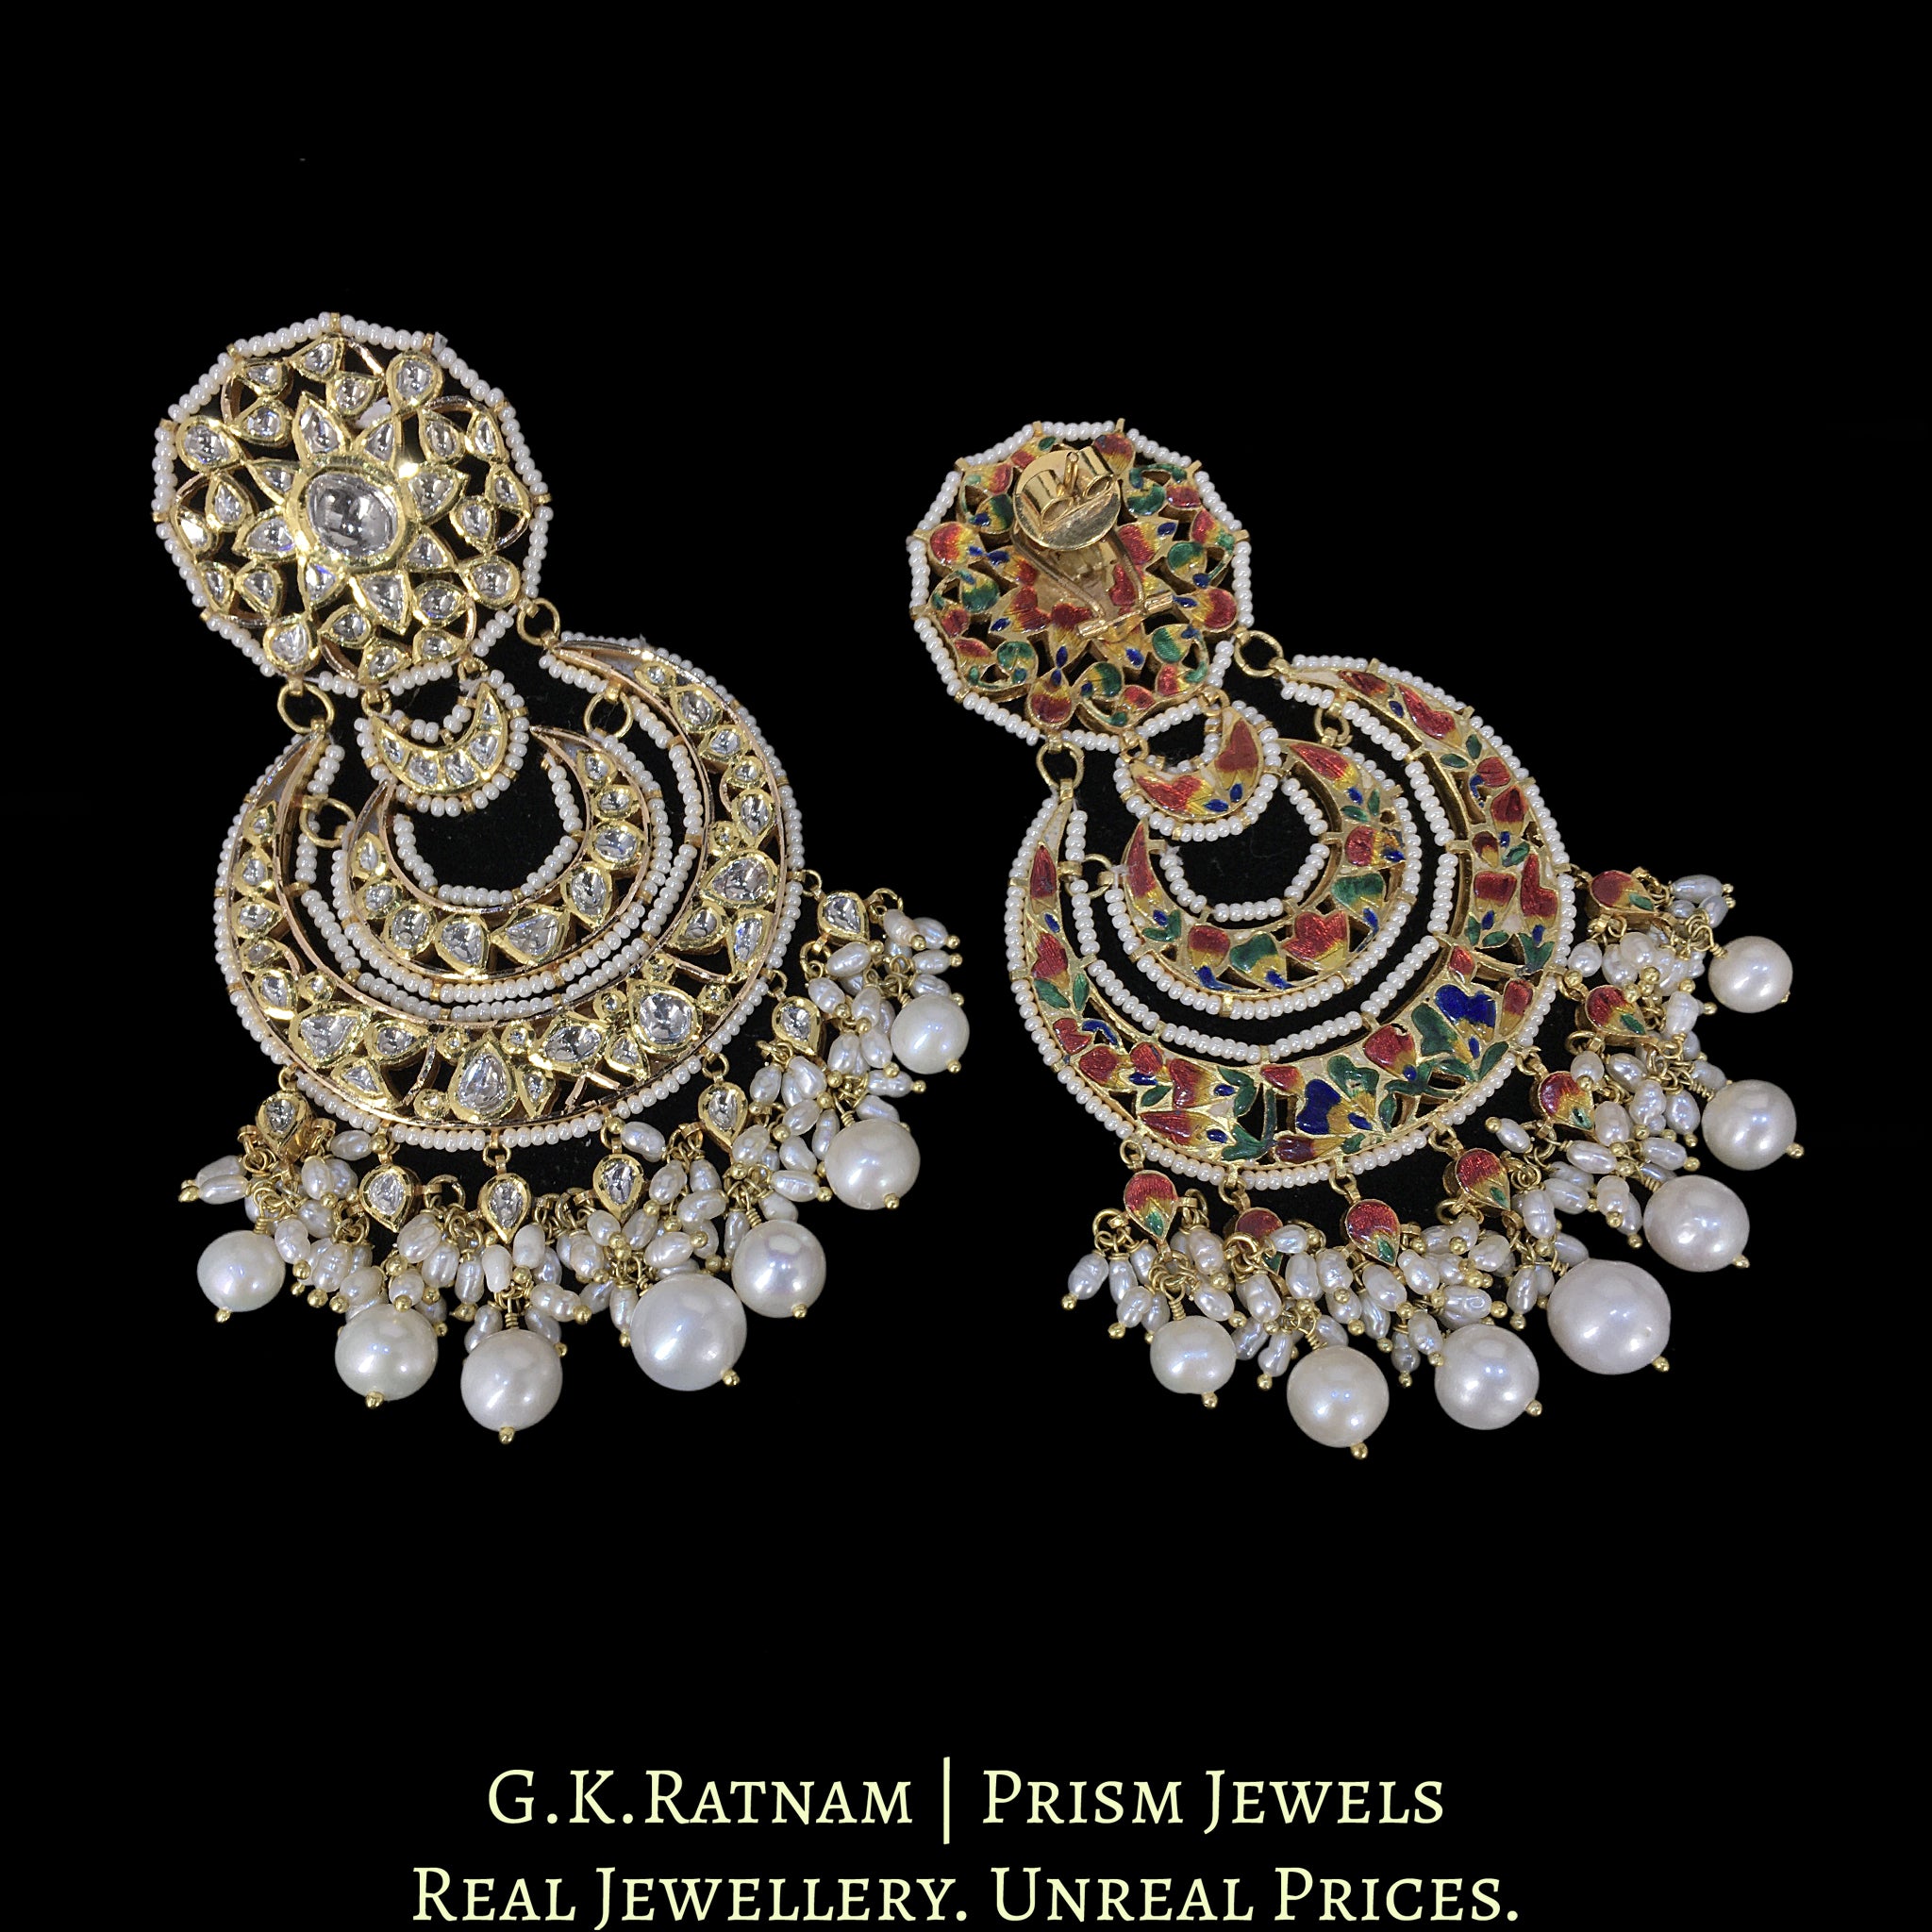 18k Gold and Diamond Polki Chand Bali Earring Pair with Natural Freshwater Pearls